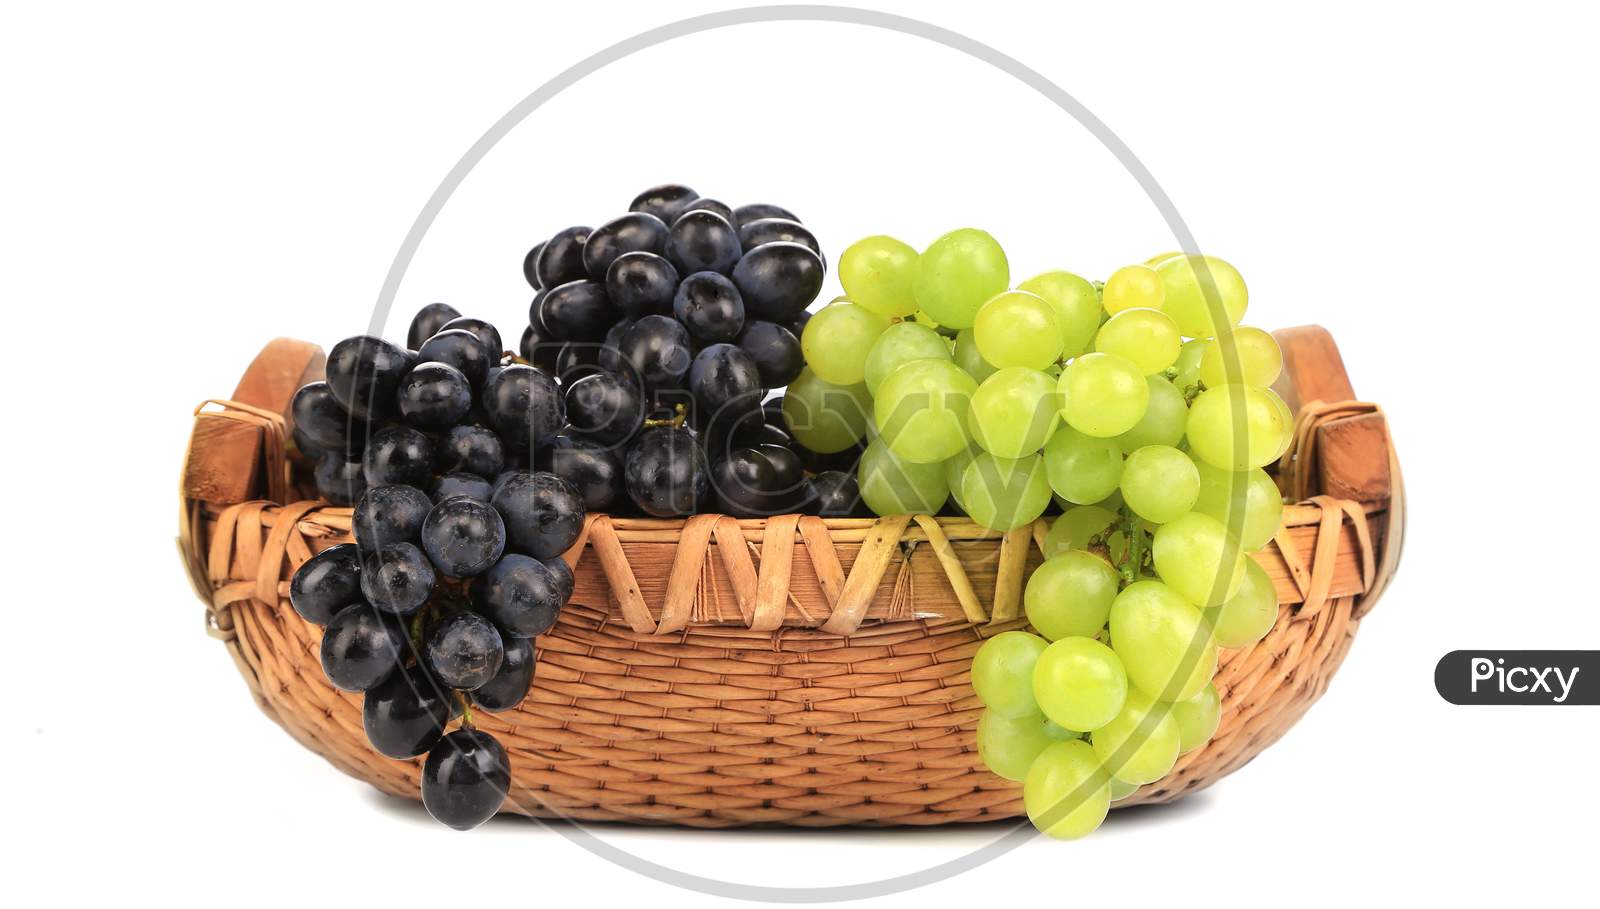 Black And Green Grapes In Basket. Isolated On A White Background.